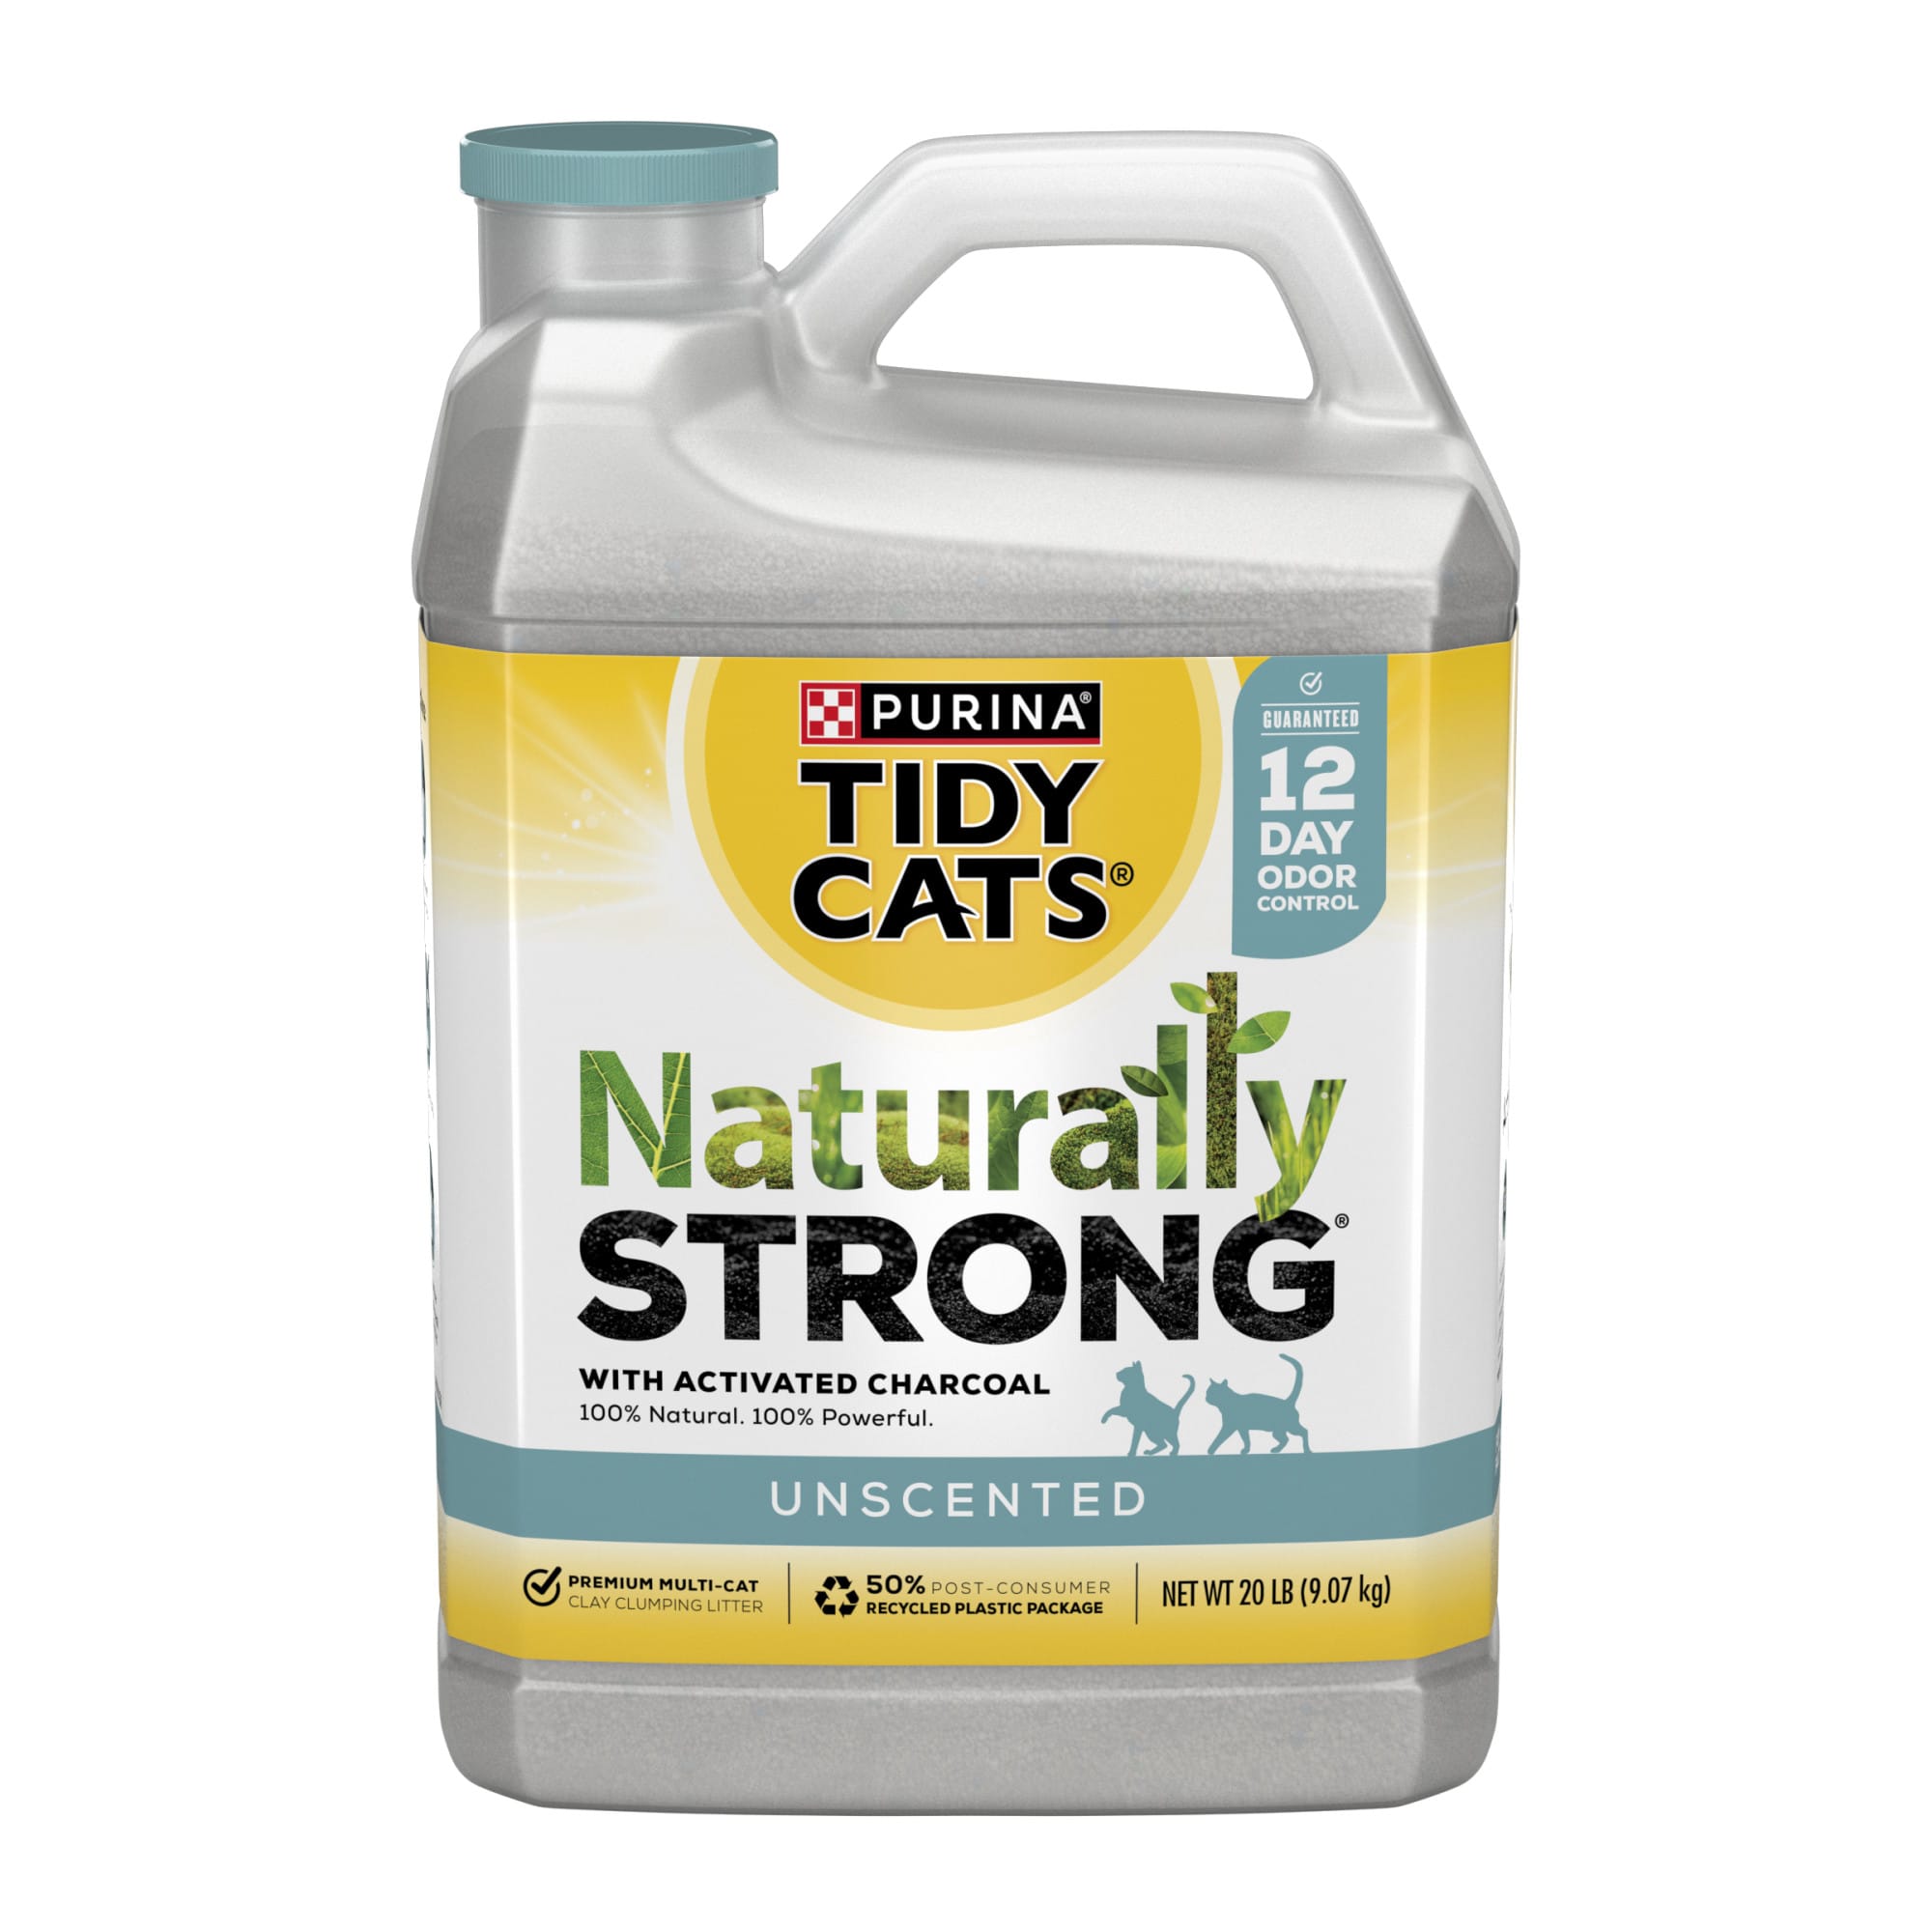 Purina Tidy Cats Unscented Naturally Strong Clumping MultiCat Litter